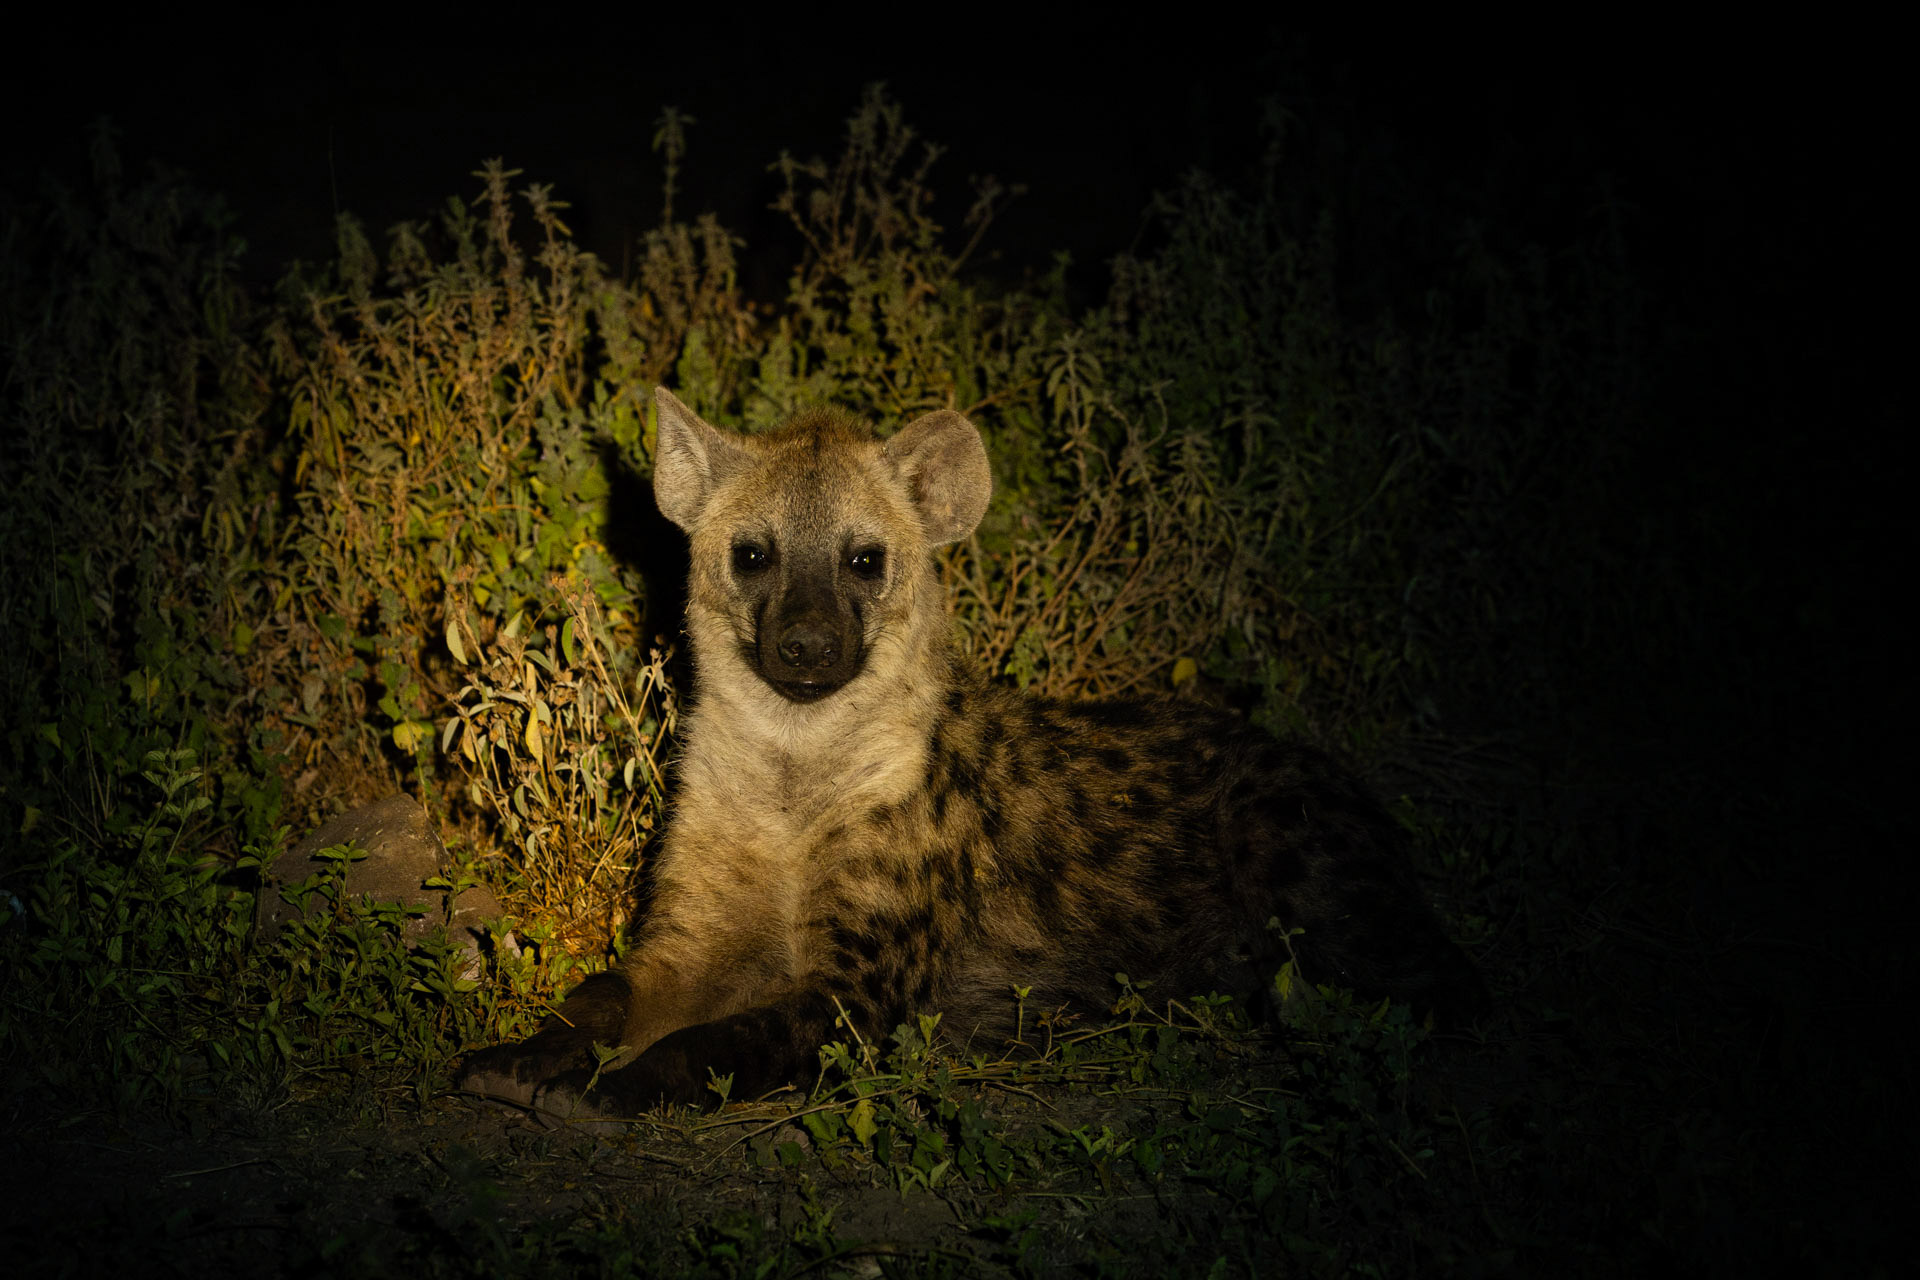 Above: A curious hyena in the spotlight